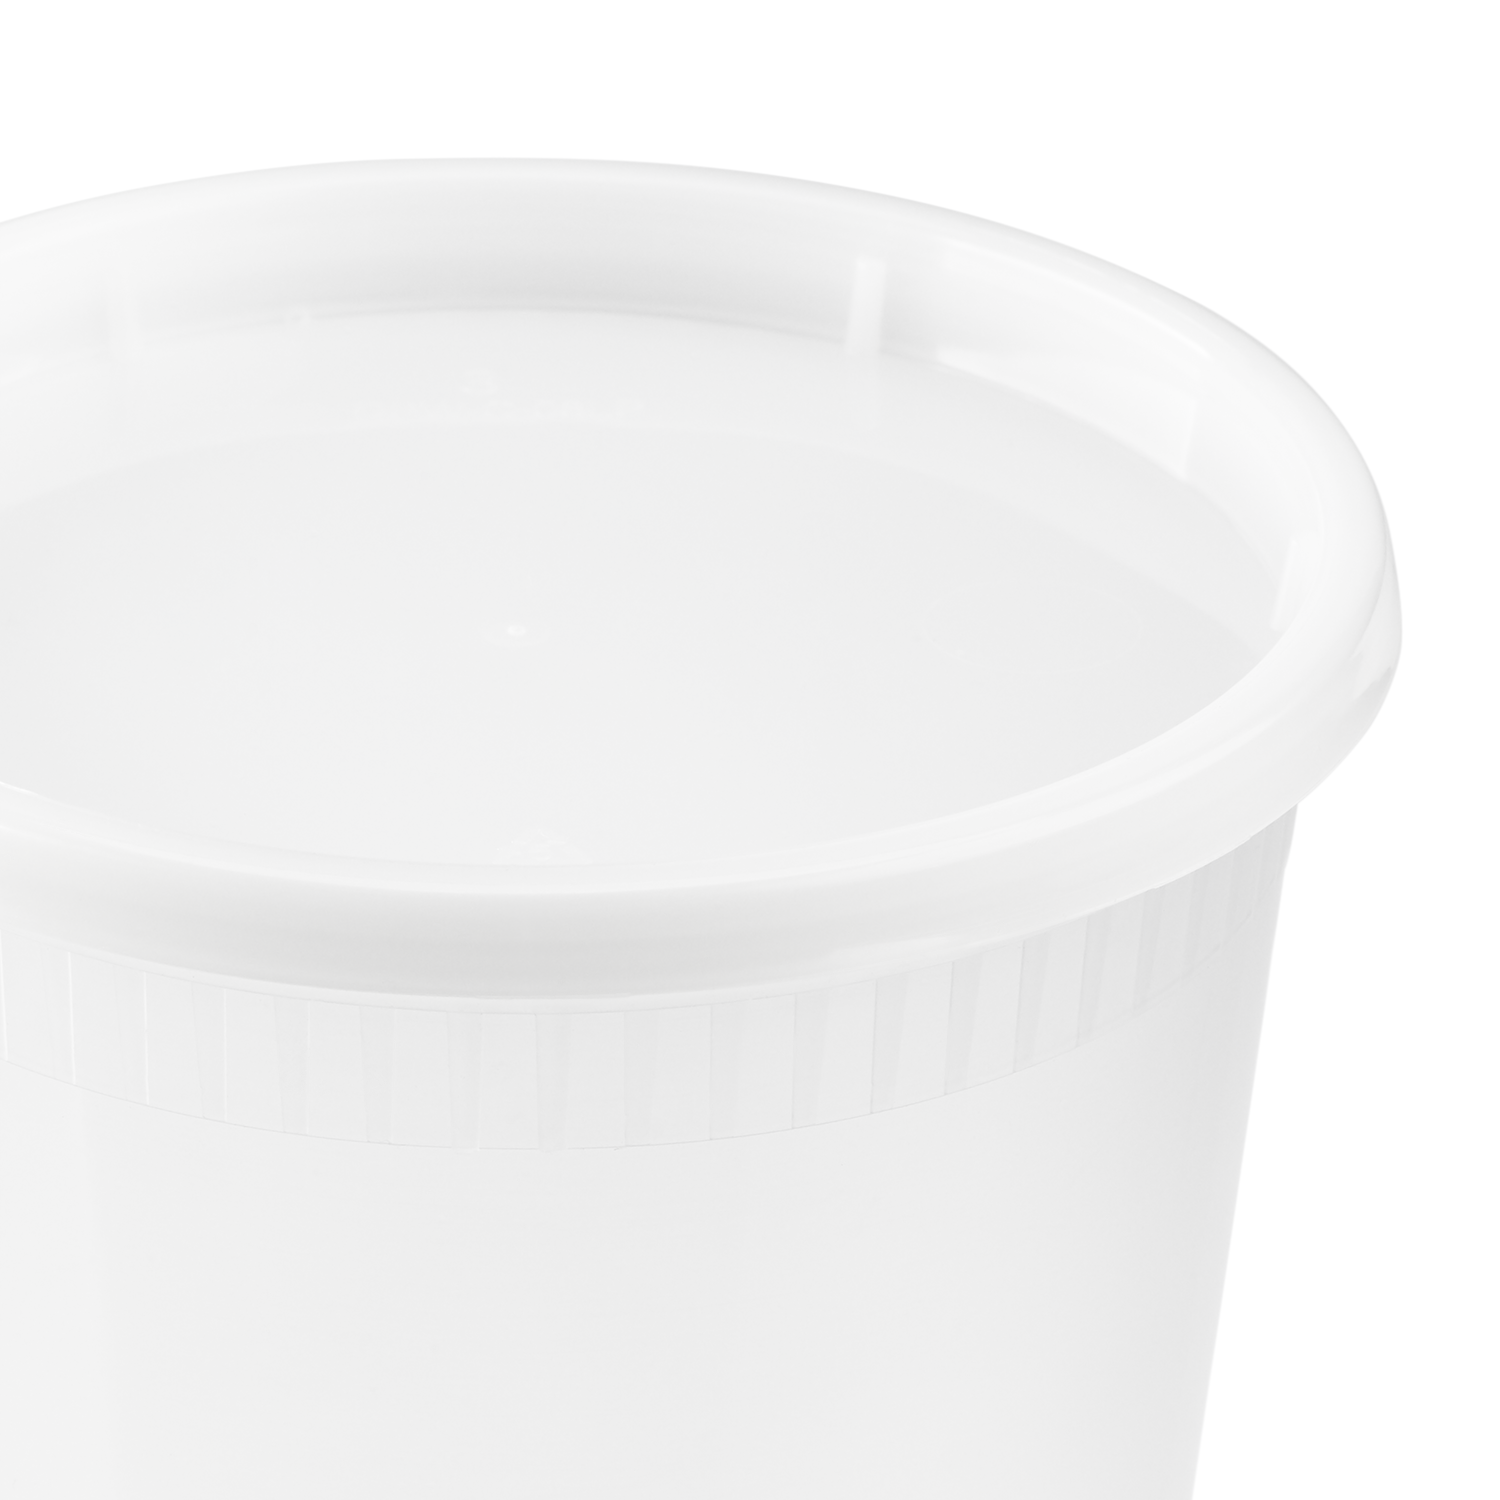 3.2 oz Deli Container with Lid